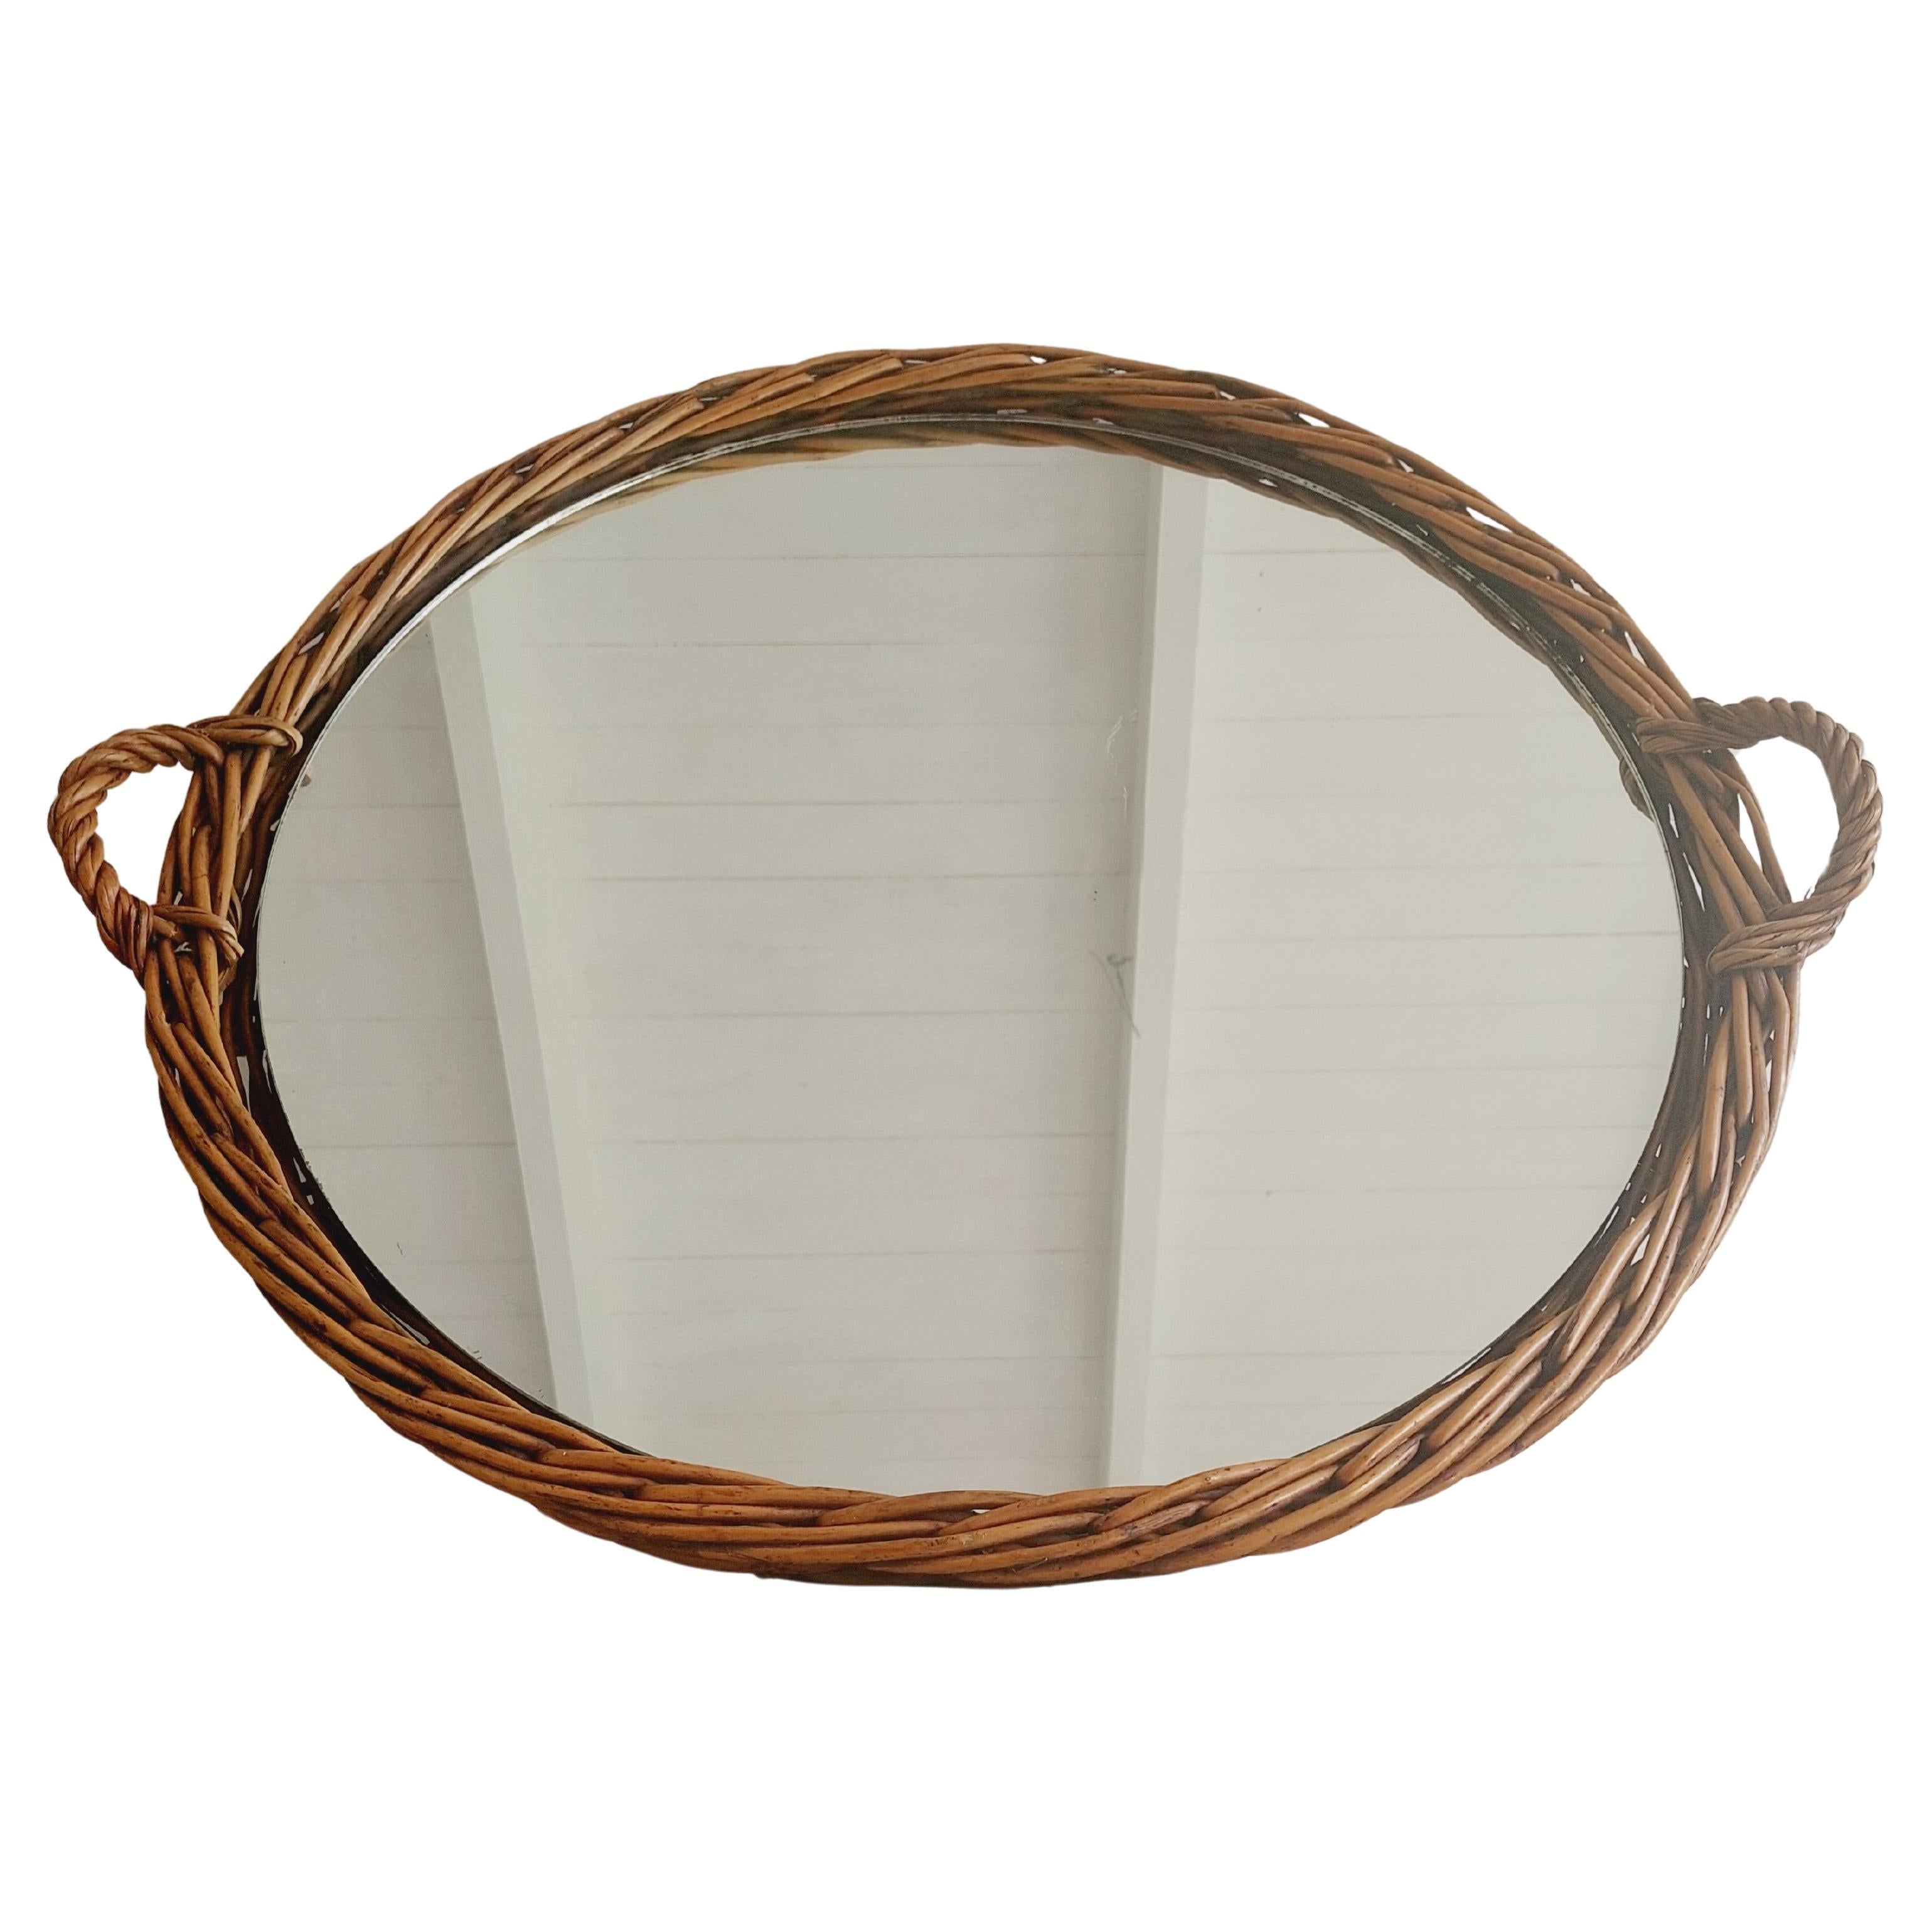  Large Round Wicker Display Mirrored Tray With Handles 64cm diam 60s